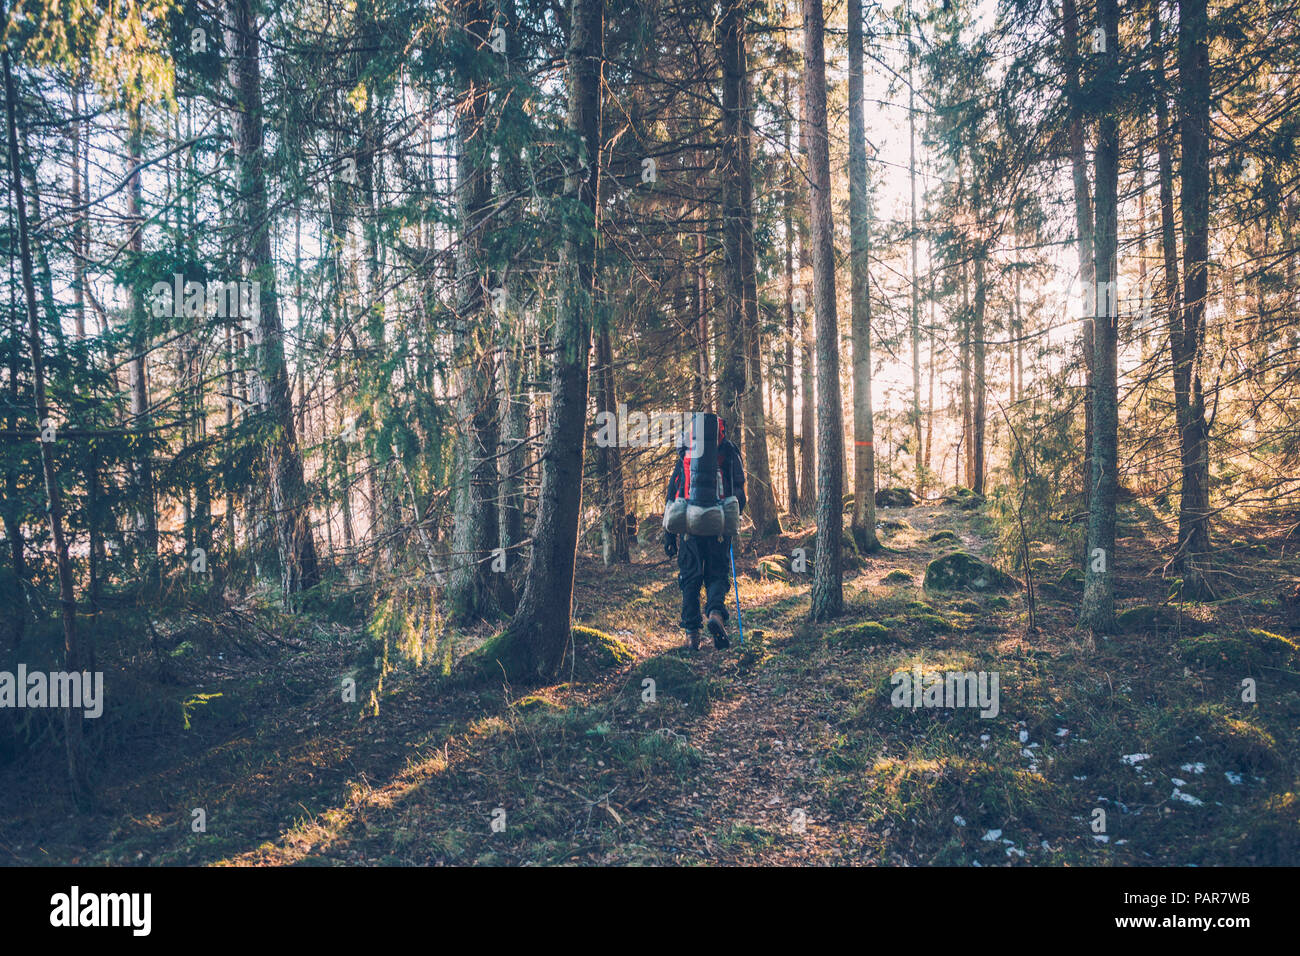 Sweden, Sodermanland, backpacker hiking in remote forest in backlight Stock Photo